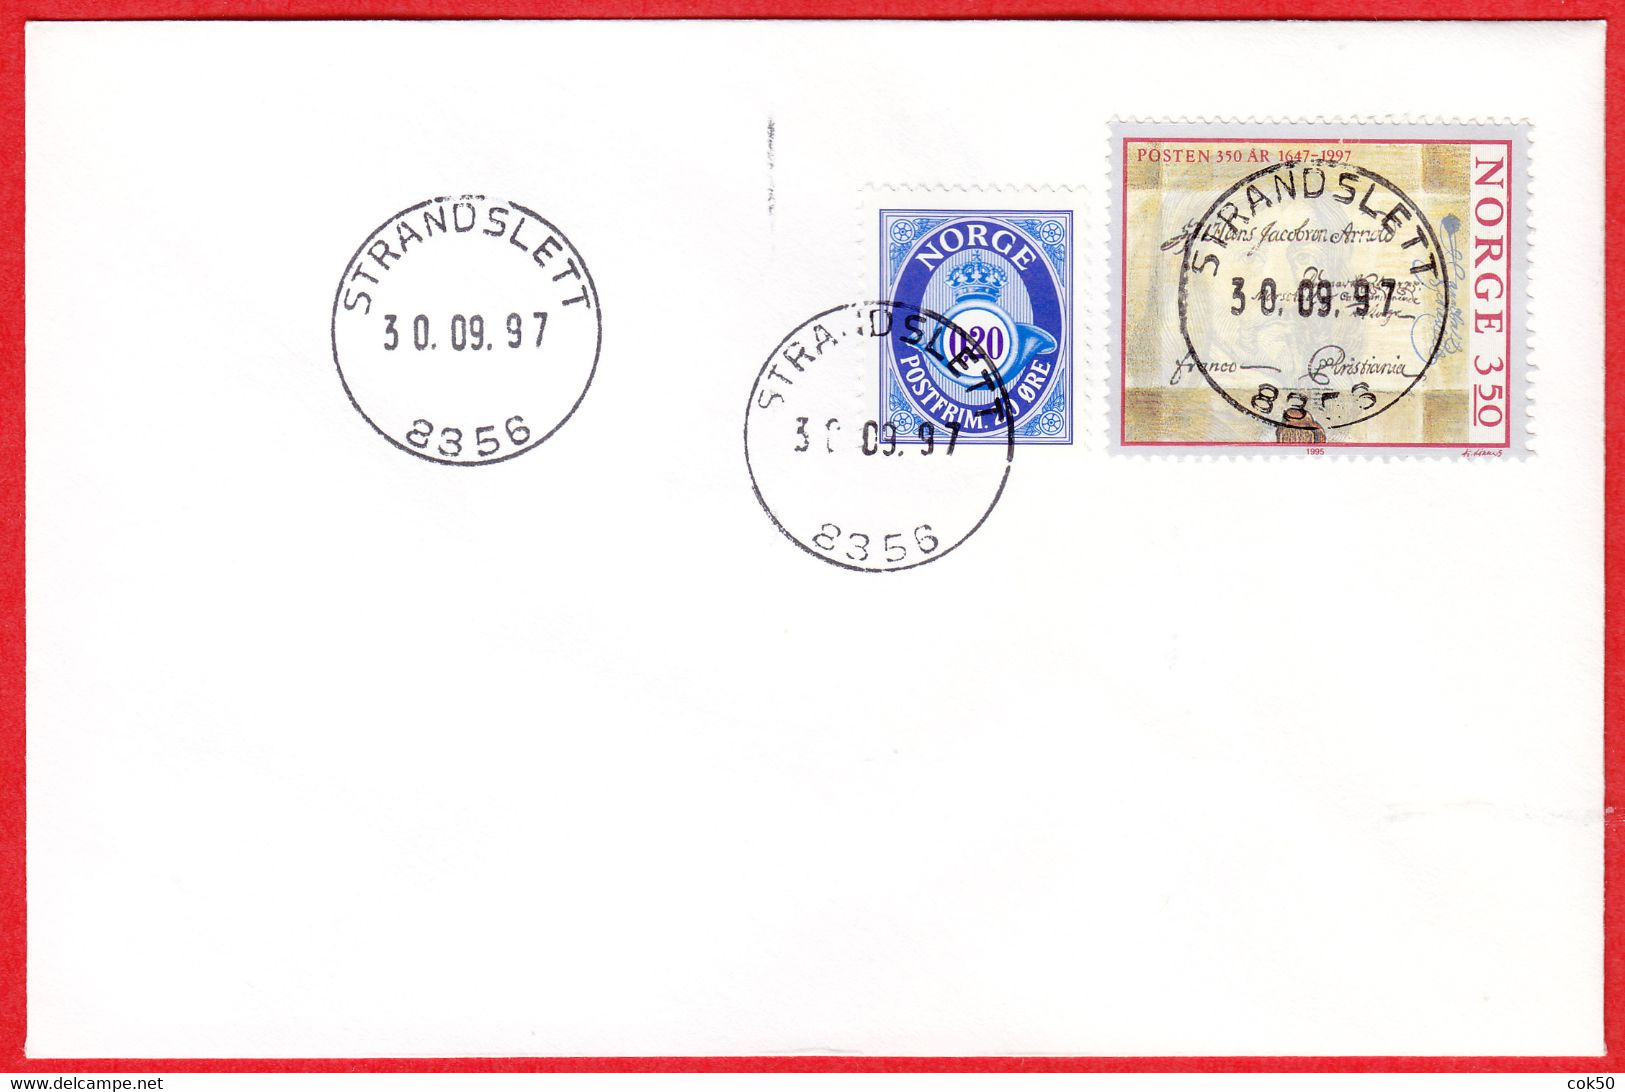 NORWAY -  8356 STRANDSLETT - 24 MmØ - (Nordland County) - Last Day/postoffice Closed On 1997.09.30 - Local Post Stamps